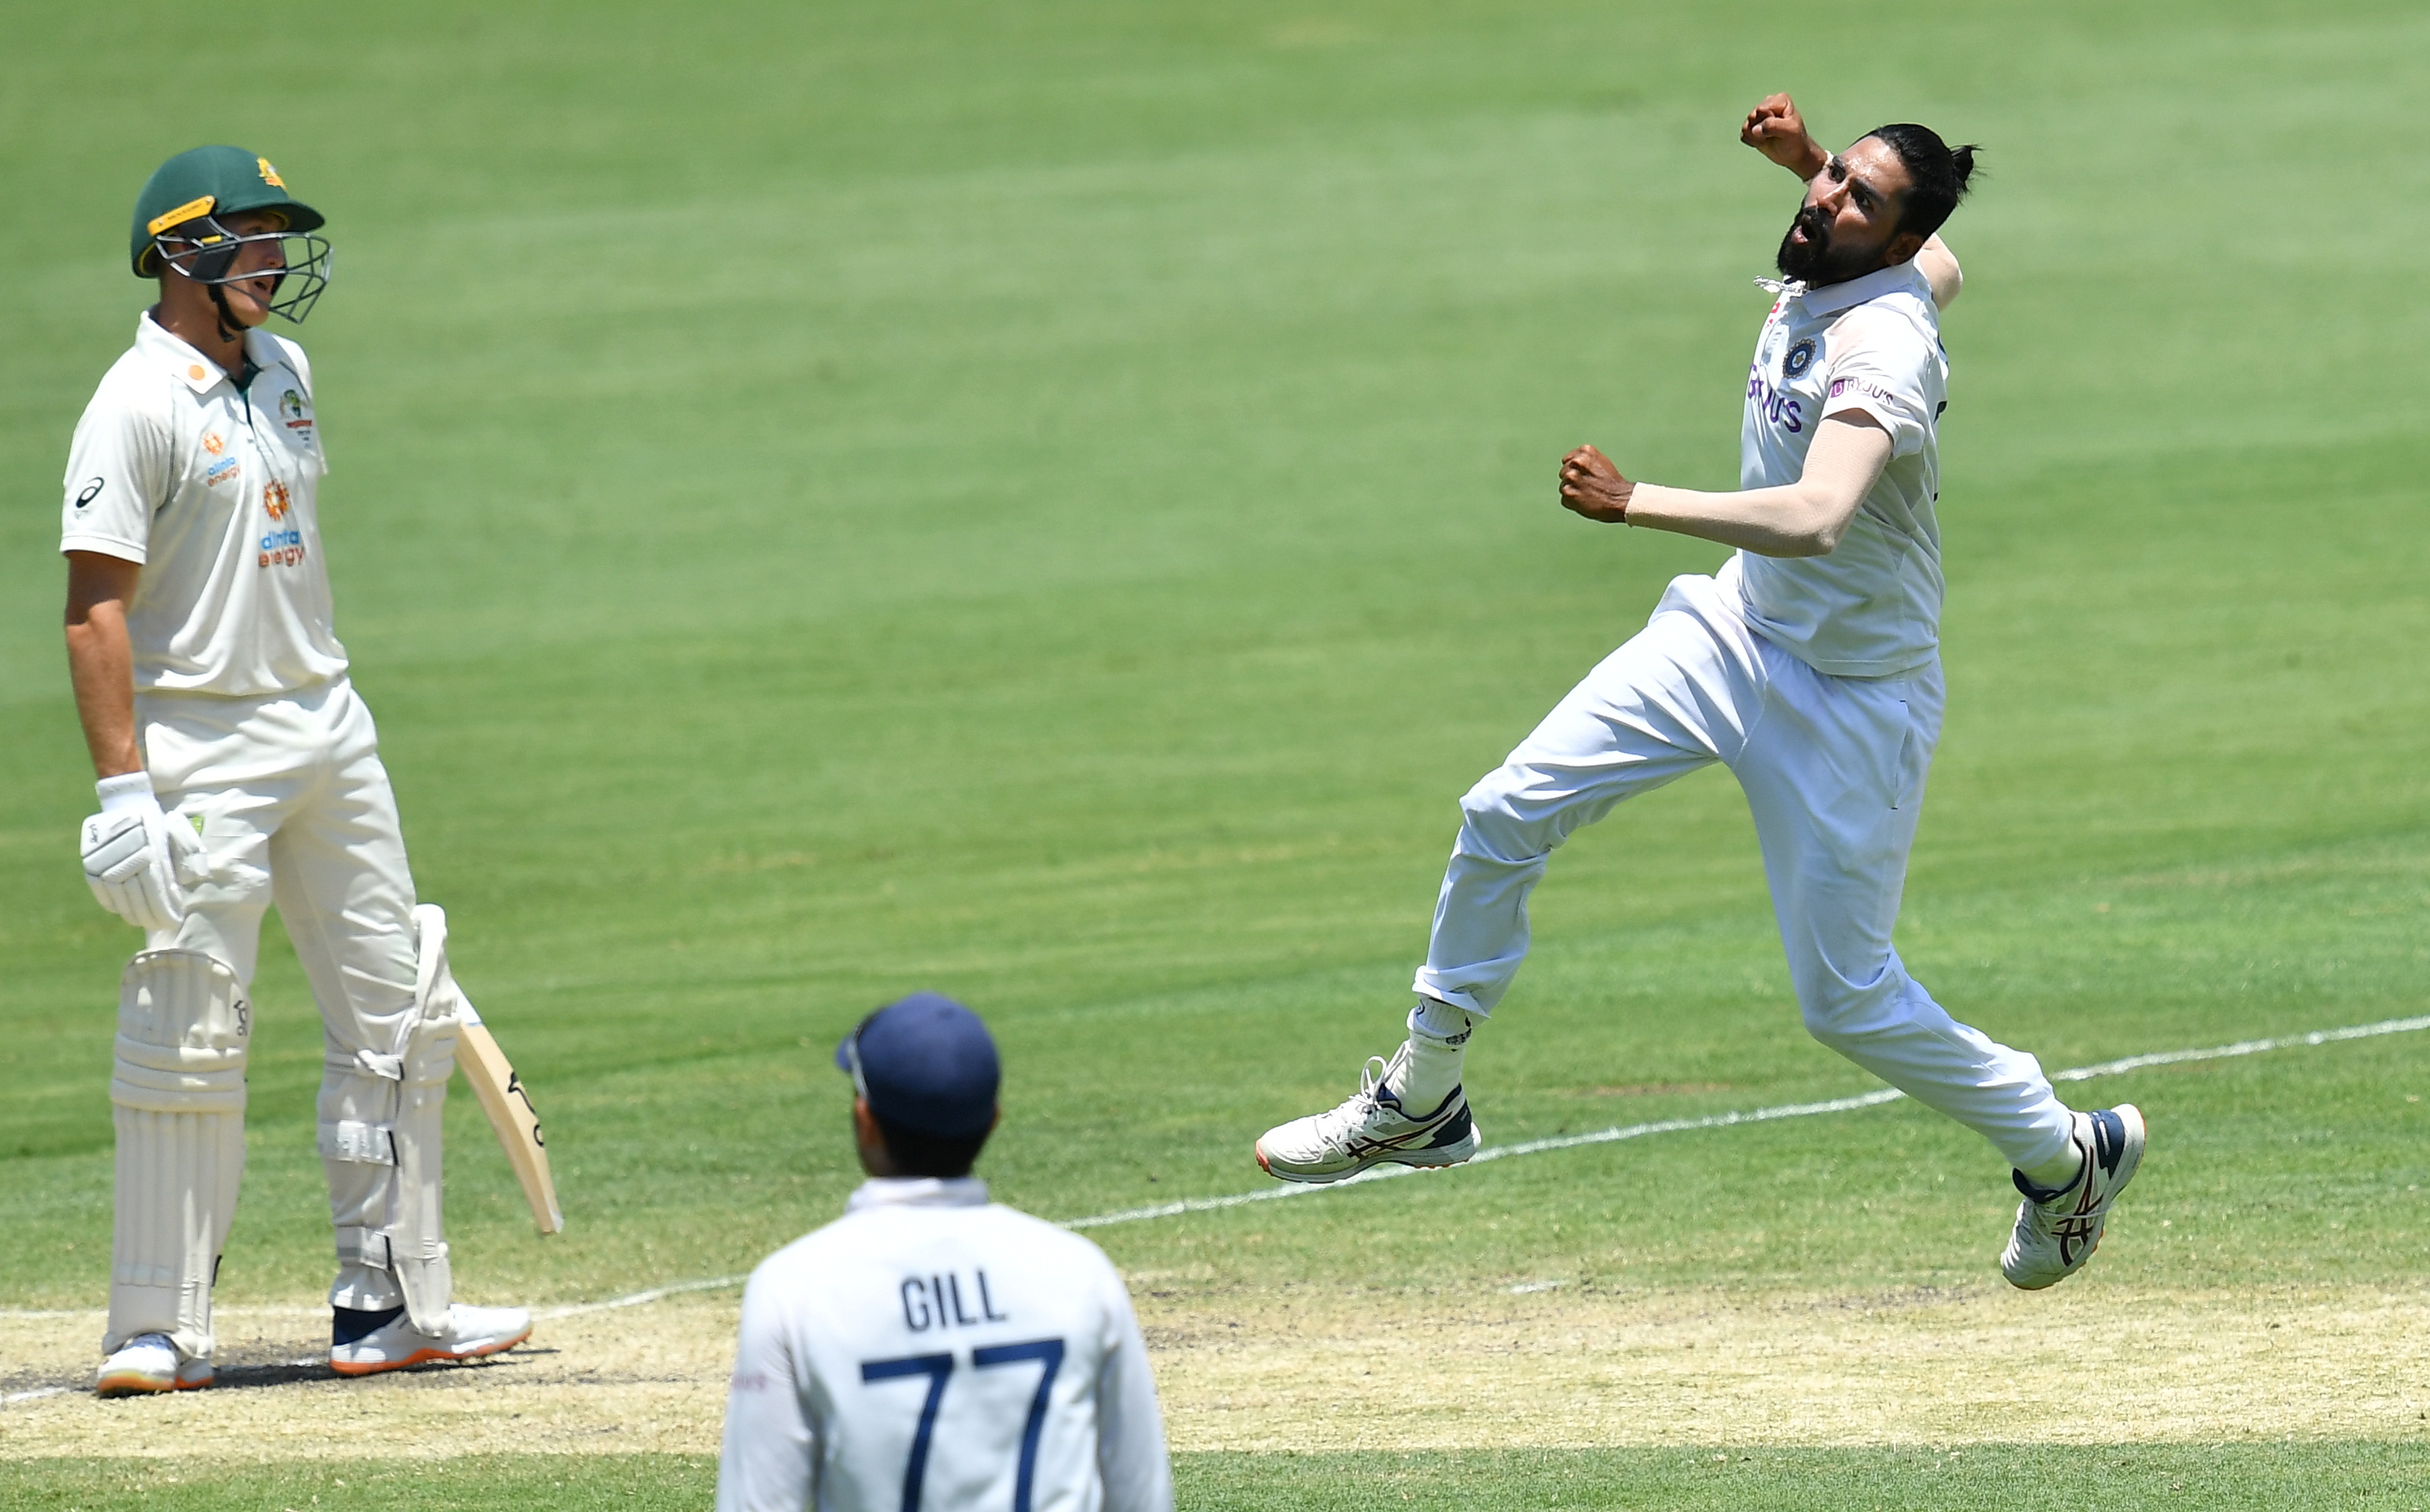 Mohammed Siraj of India celebrates the wicket of Marnus Labuschagne of Australia during day four of the fourth test match between Australia and India at the Gabba in Brisbane, Australia, January 18, 2021. Photo: Reuters